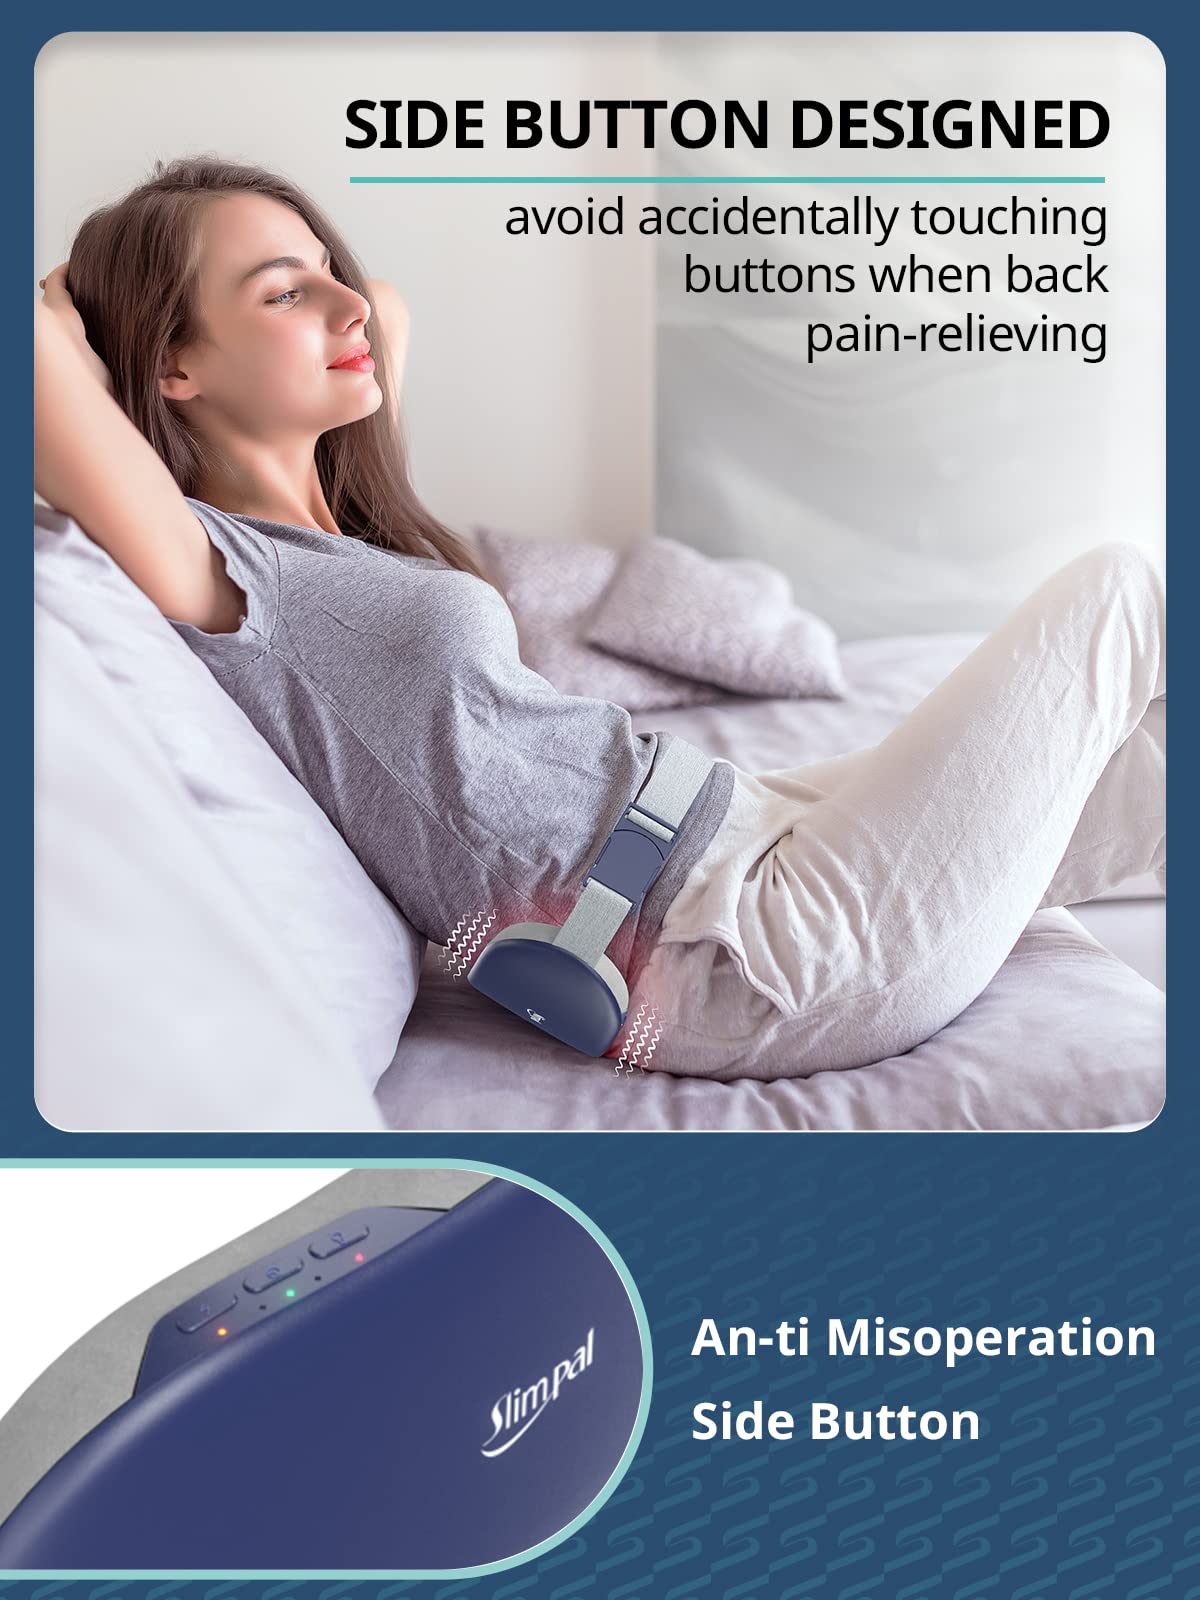 slimpal cordless heating pad for period cramp pain side button design aviod wrong click